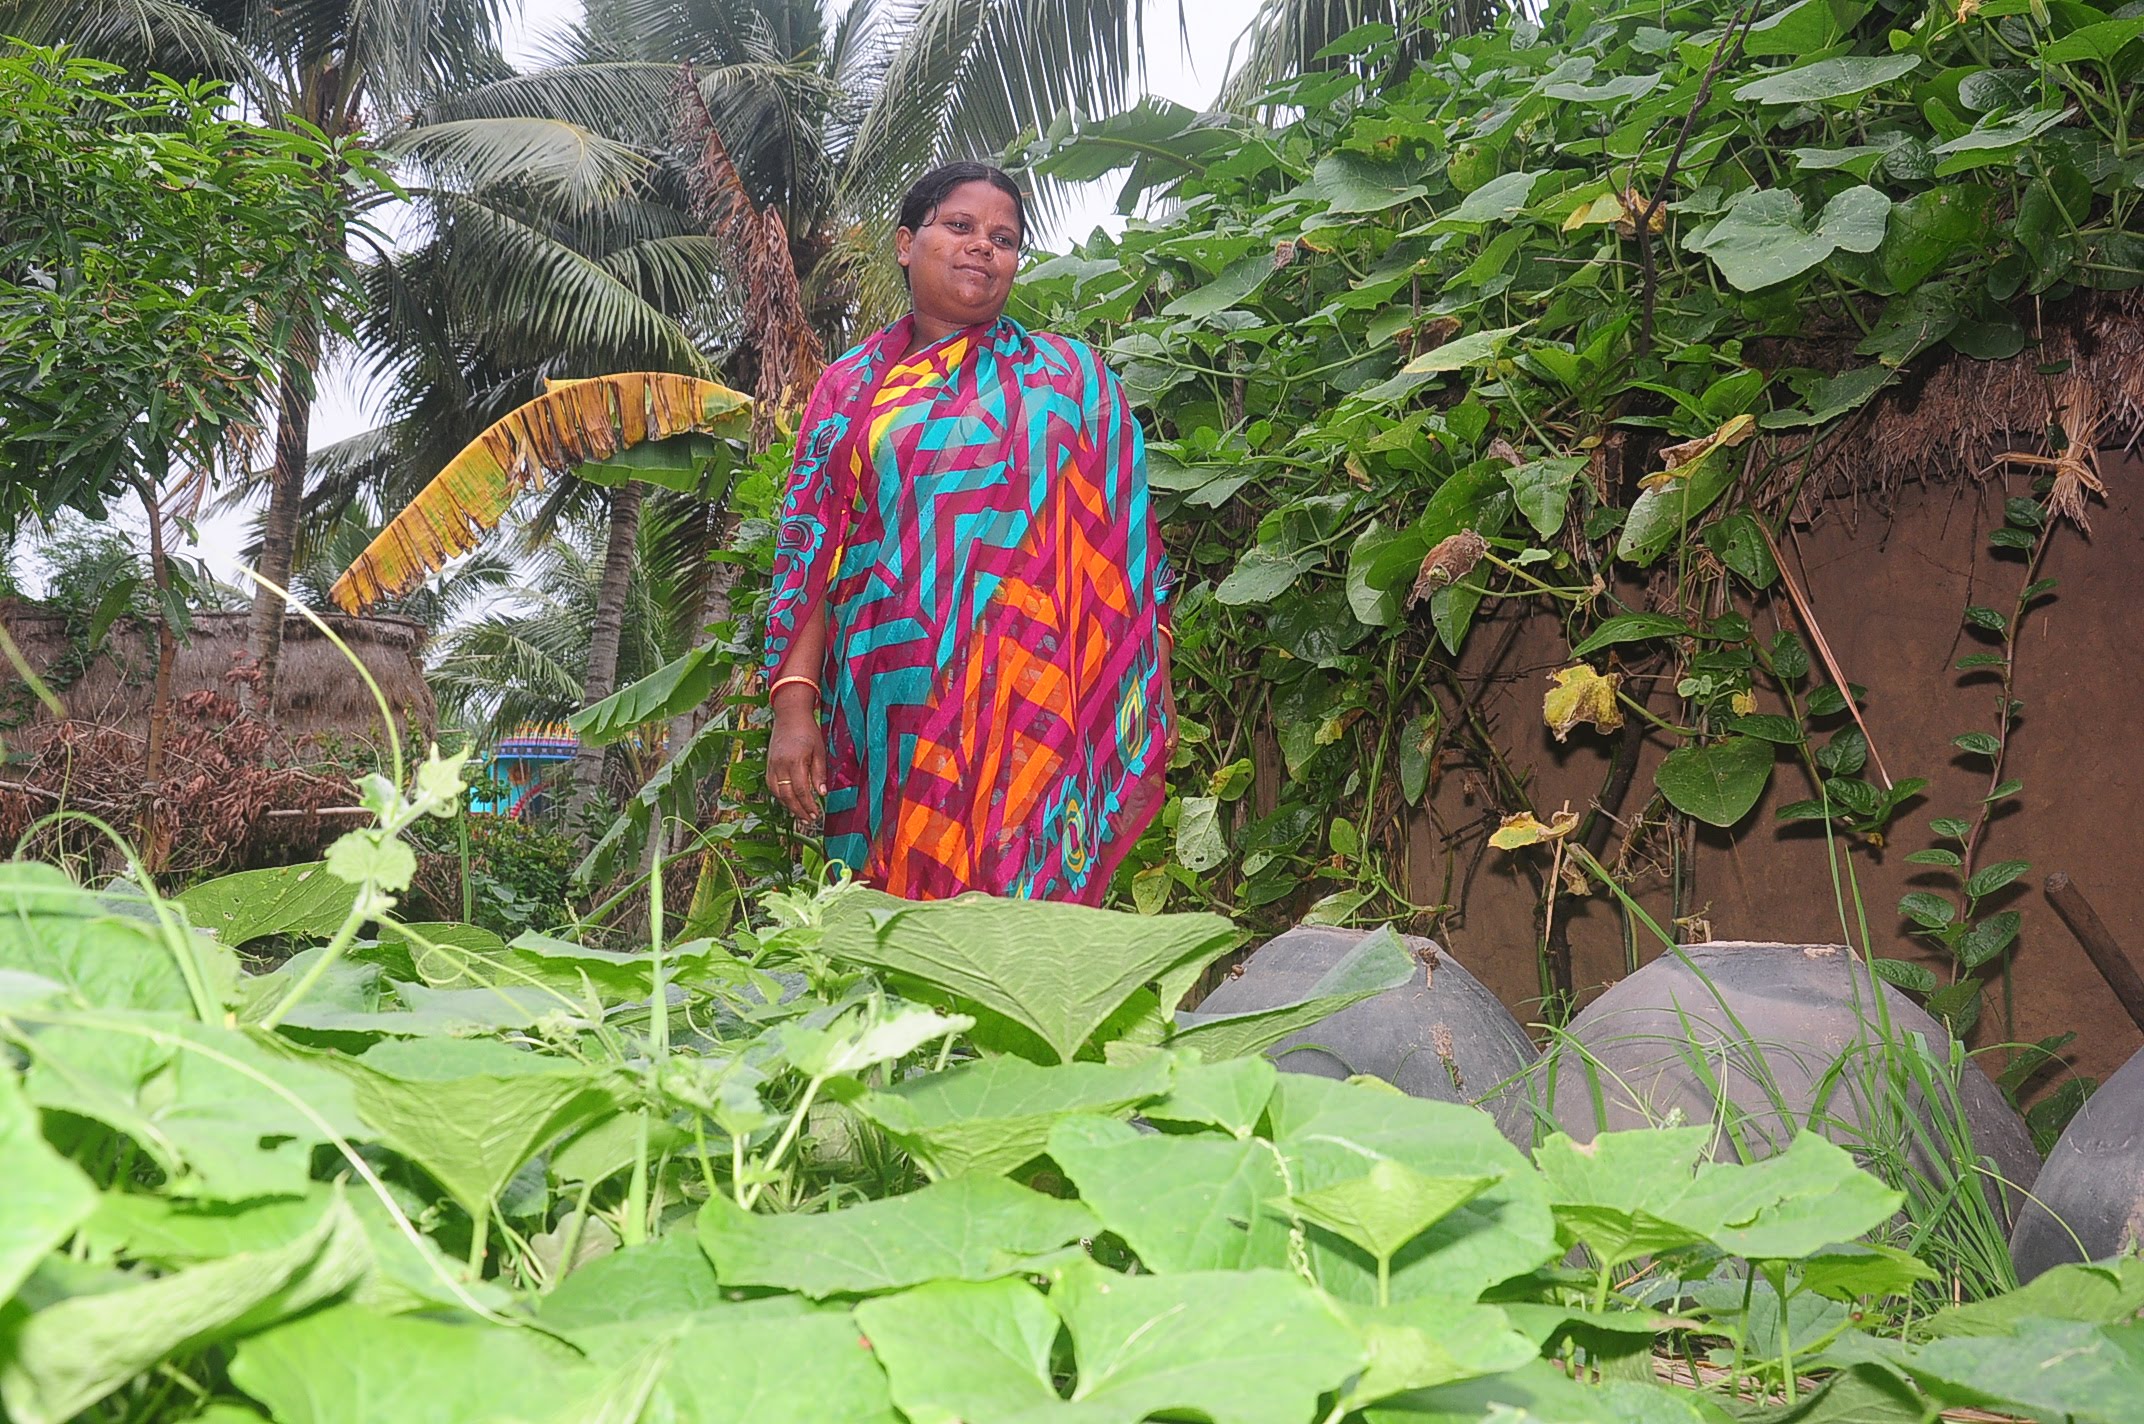 Pratima Senapati stands amongst the crops she has planted.